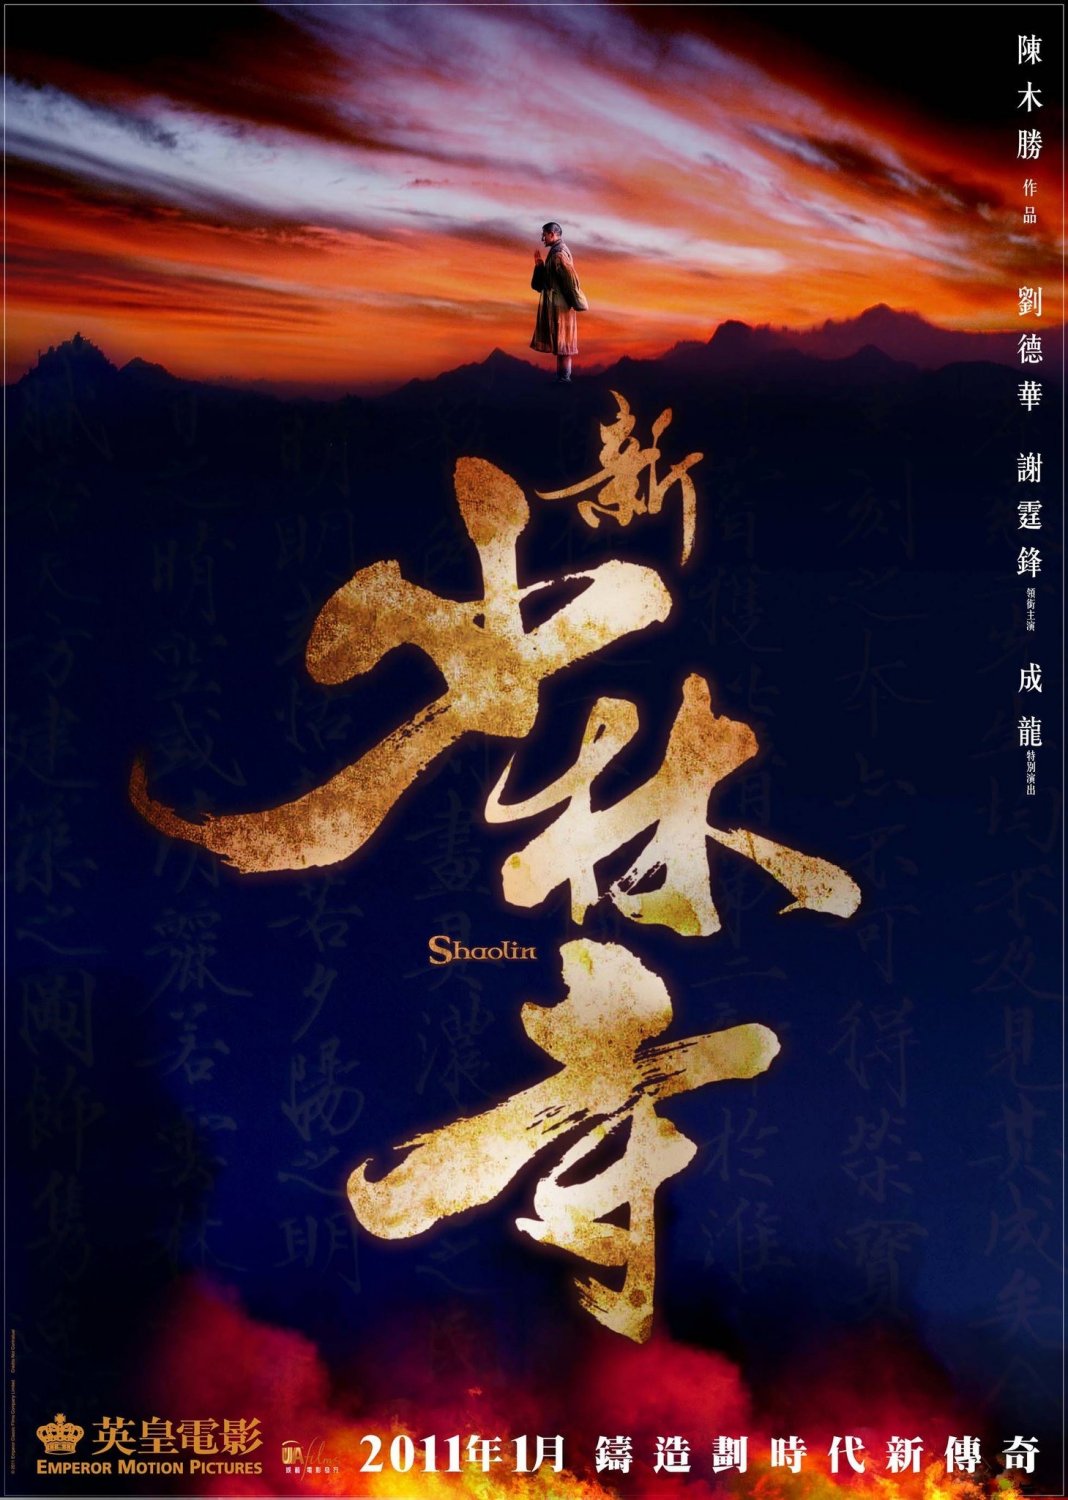 Extra Large Movie Poster Image for Shaolin (#1 of 4)